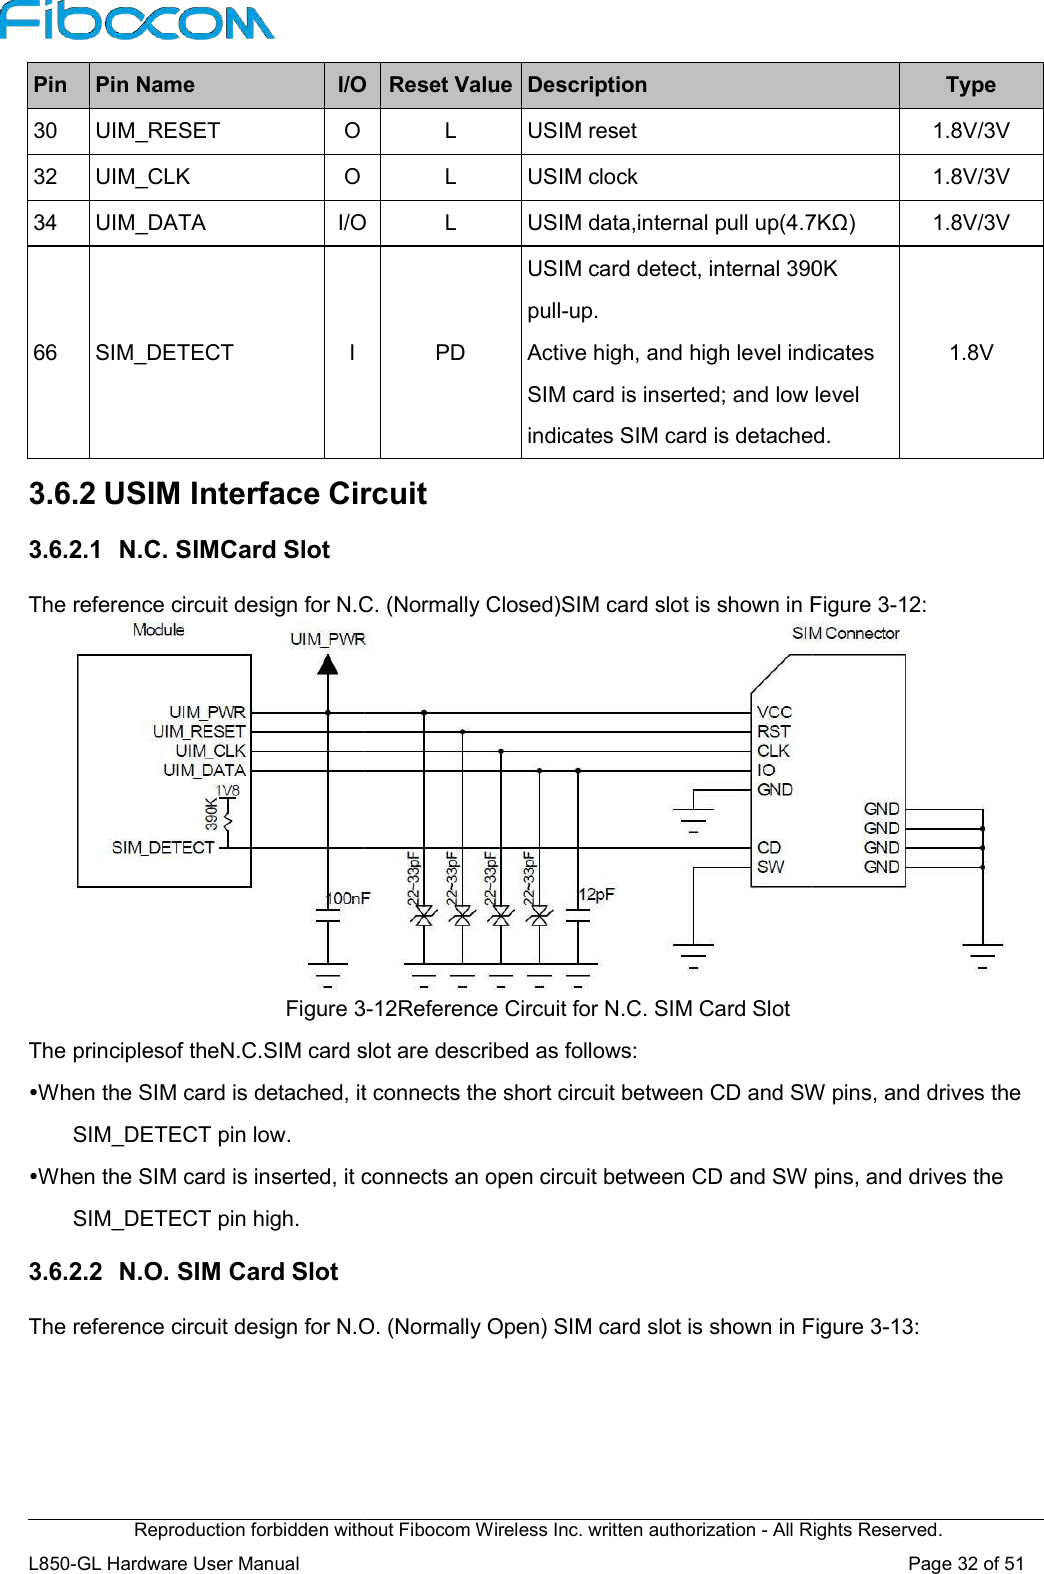 Reproduction forbidden without Fibocom Wireless IL850-GL Hardware User Manual    Pin  Pin Name I/O30  UIM_RESET O 32  UIM_CLK O 34  UIM_DATA I/O   66    SIM_DETECT    I 3.6.2 USIM Interface Circuit3.6.2.1 N.C. SIMCard Slot  The reference circuit design for N.C. (Normally Closed)SIM card slot is shown in Figure 3Figure 3The principlesof theN.C.SIM card slot are described as follows:When the SIM card is detached, it connects the short circuit between CD and SW pins, and drives the SIM_DETECT pin low. When the SIM card is inserted, it connects an open circuit between CD and SW pins, and drives the SIM_DETECT pin high. 3.6.2.2 N.O. SIM Card Slot  The reference circuit design for N.O. (Normally Open) SIM card slot is shown in Figure 3Reproduction forbidden without Fibocom Wireless Inc. written authorization - All Rights Reserved.I/O Reset Value Description  L  USIM reset  L  USIM clock I/O L USIM data,internal pull up(4.7KΩ)    PD USIM card detect, internal 390K pull-up. Active high, and high level indicates SIM card is inserted; and low level indicates SIM card is detached.Circuit The reference circuit design for N.C. (Normally Closed)SIM card slot is shown in Figure 3Figure 3-12Reference Circuit for N.C. SIM Card Slot The principlesof theN.C.SIM card slot are described as follows: is detached, it connects the short circuit between CD and SW pins, and drives the When the SIM card is inserted, it connects an open circuit between CD and SW pins, and drives the circuit design for N.O. (Normally Open) SIM card slot is shown in Figure 3All Rights Reserved. Page 32 of 51 Type 1.8V/3V 1.8V/3V USIM data,internal pull up(4.7KΩ)  1.8V/3V USIM card detect, internal 390K Active high, and high level indicates SIM card is inserted; and low level indicates SIM card is detached.    1.8V The reference circuit design for N.C. (Normally Closed)SIM card slot is shown in Figure 3-12: is detached, it connects the short circuit between CD and SW pins, and drives the When the SIM card is inserted, it connects an open circuit between CD and SW pins, and drives the circuit design for N.O. (Normally Open) SIM card slot is shown in Figure 3-13: 